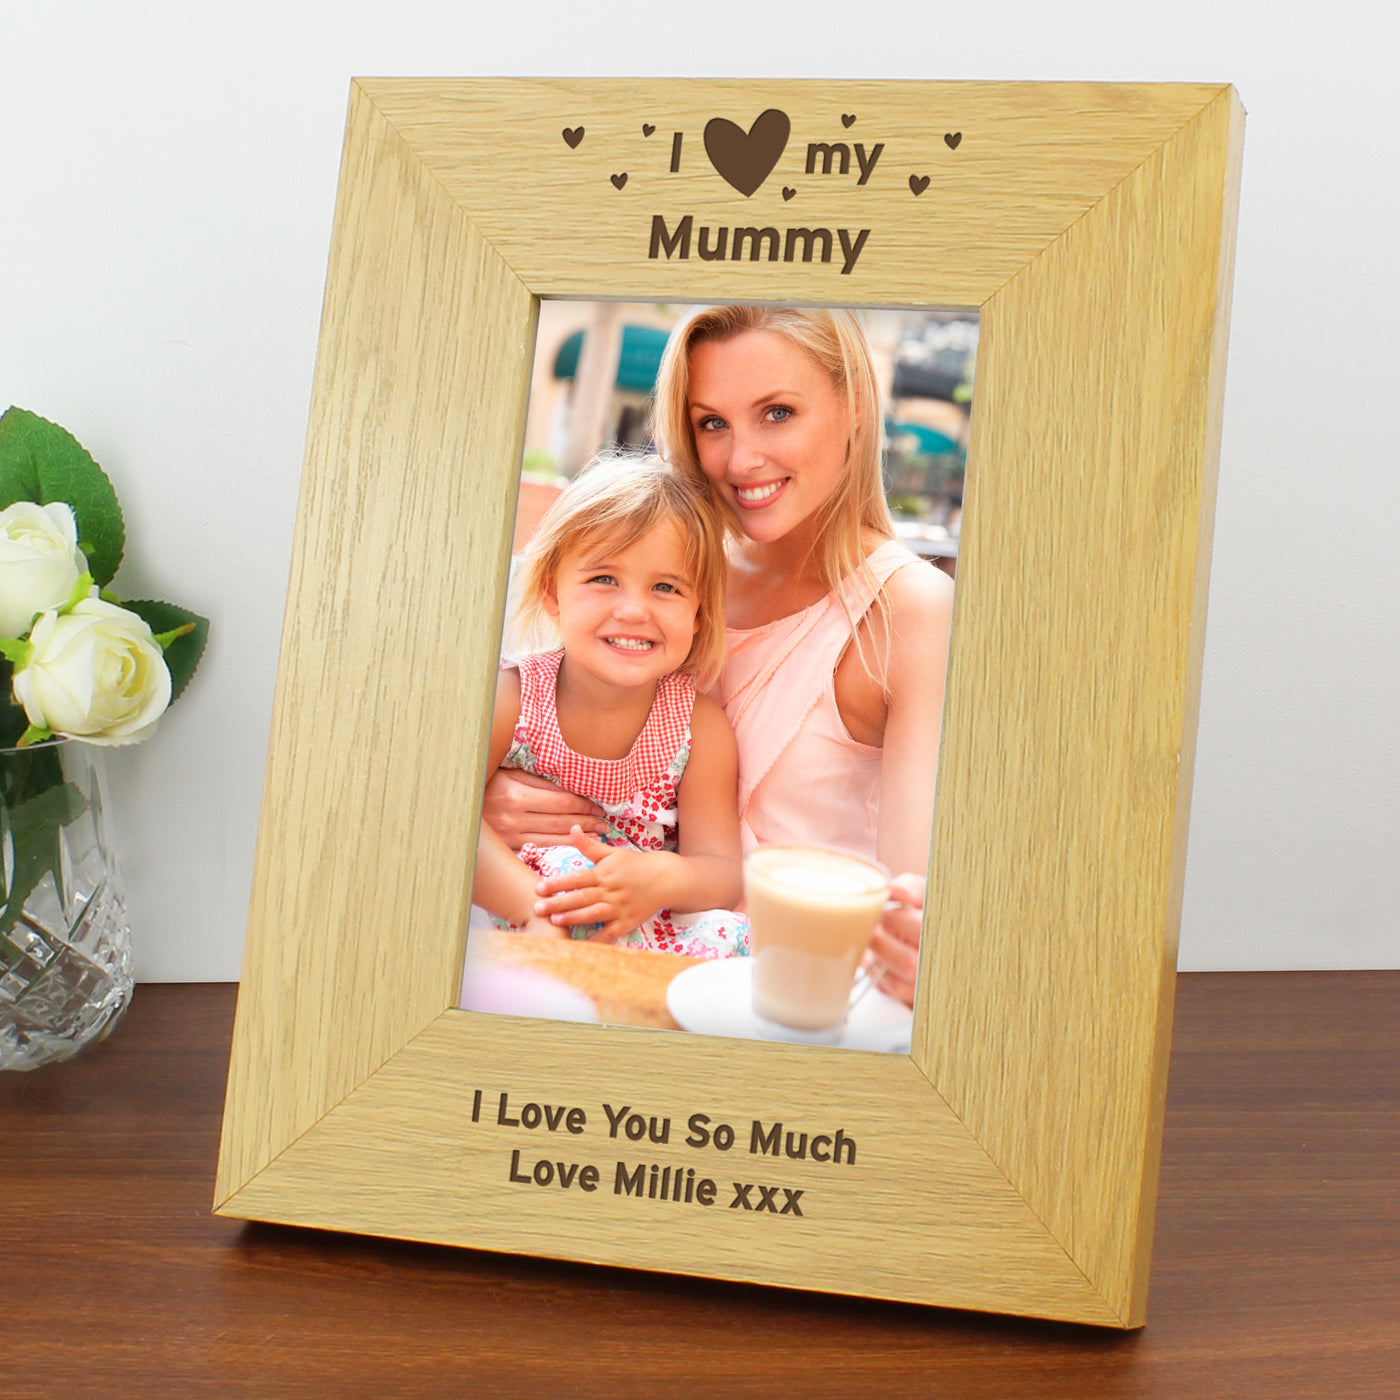 Personalised Always & Forever 10x8 Silver Photo Frame